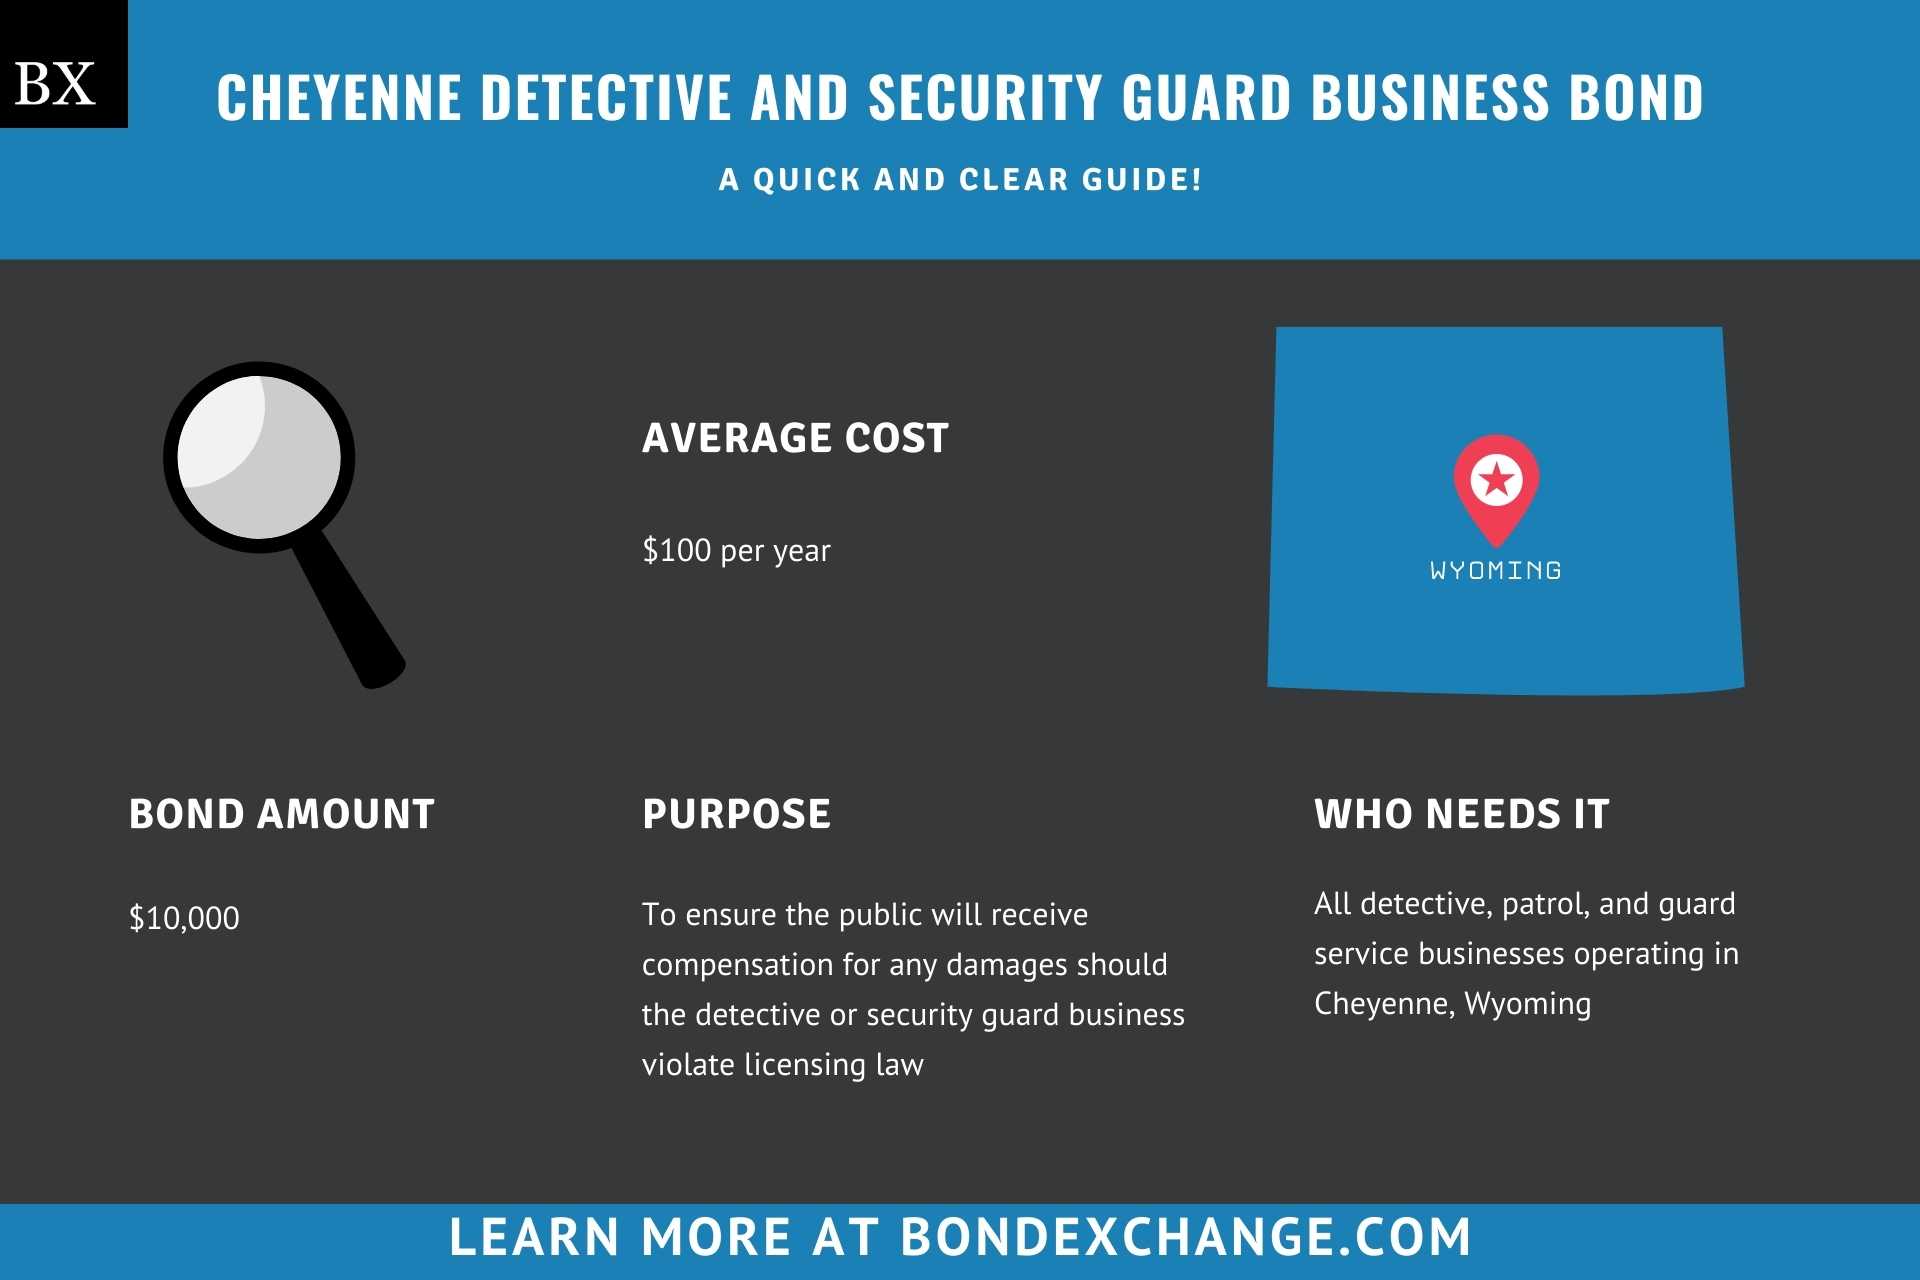 Cheyenne Detective and Security Guard Business Bond